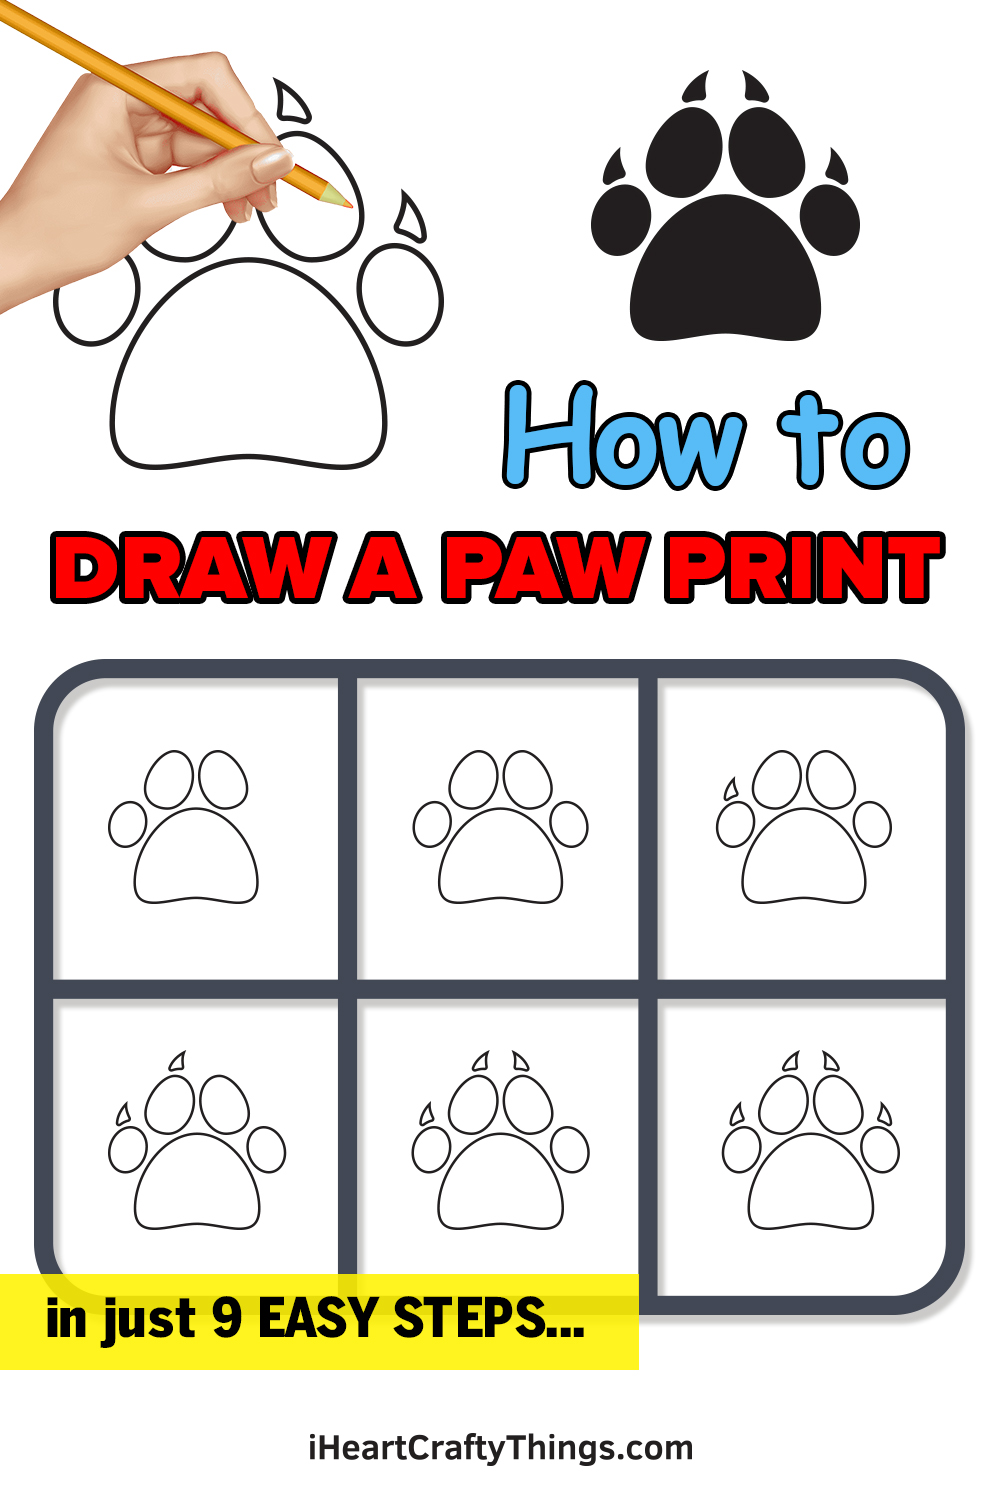 how to draw a foot print in 9 easy steps